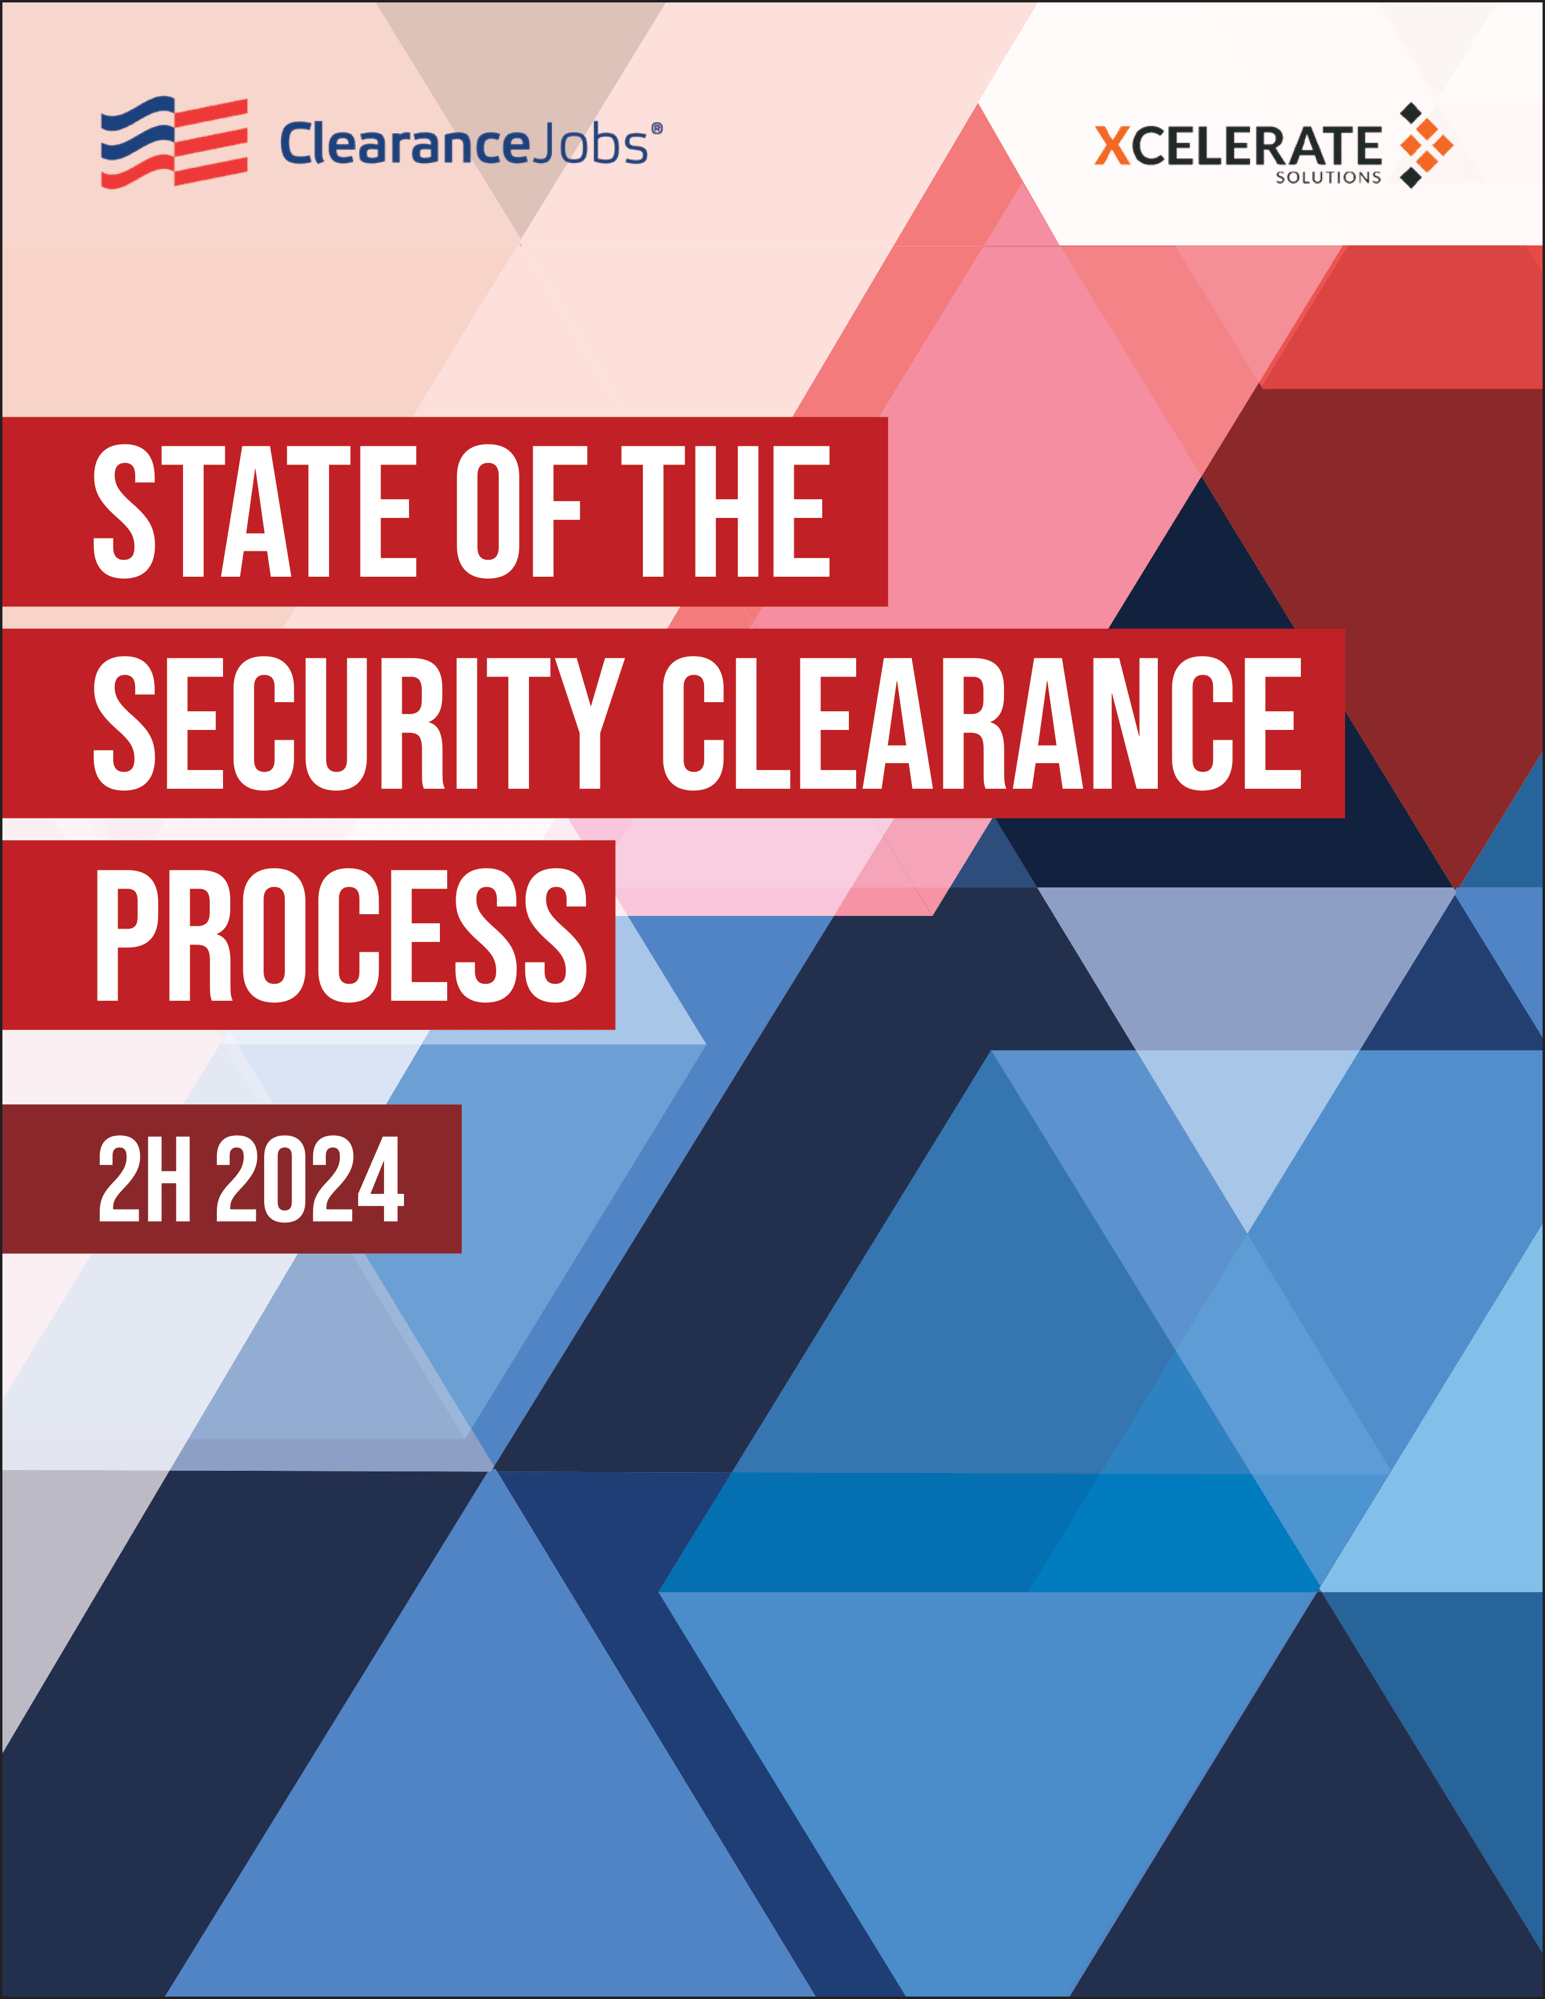 StateoftheSecurityClearanceProcess_2H2024_F-1